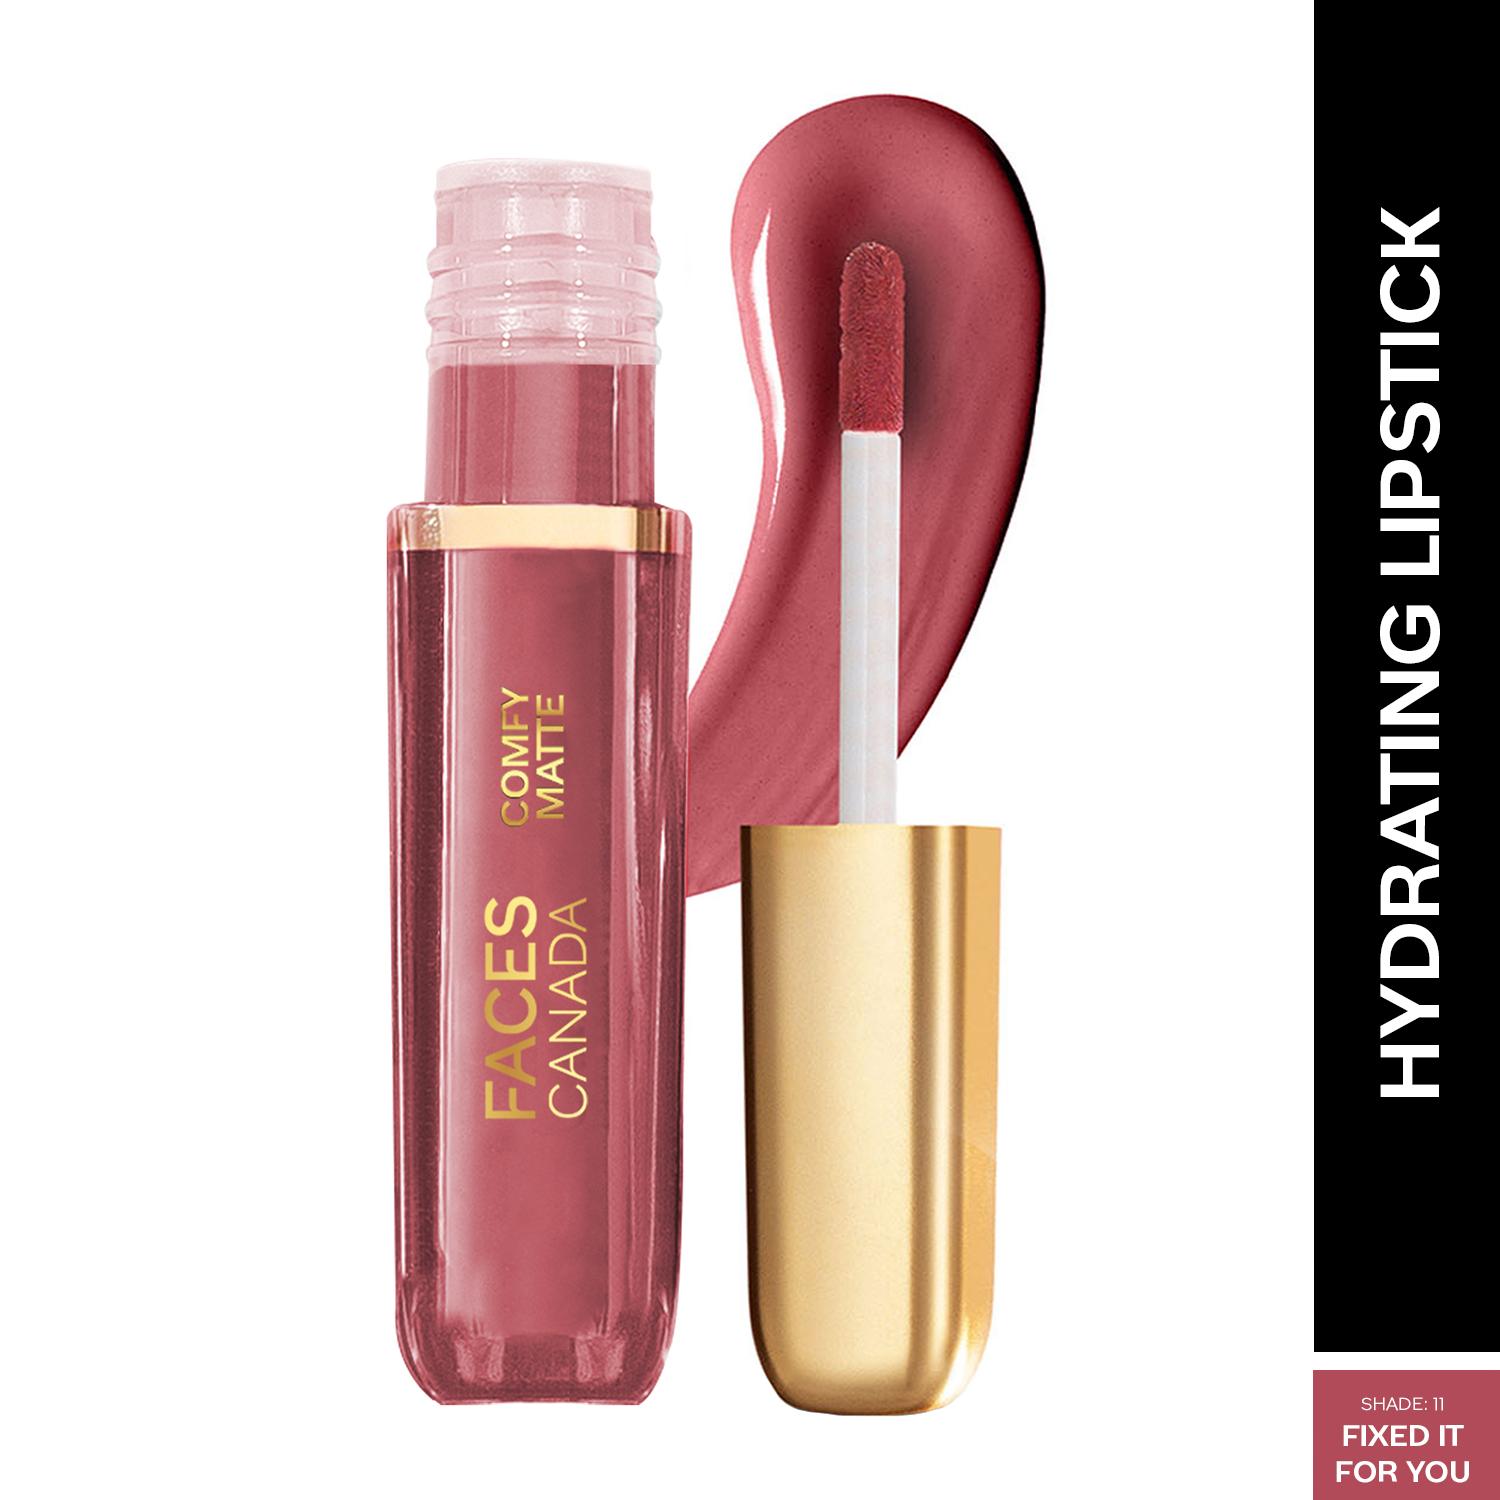 Faces Canada | Faces Canada Comfy Matte Liquid Lipstick, 10HR Stay, No Dryness - Fixed It For You 11 (3 ml)